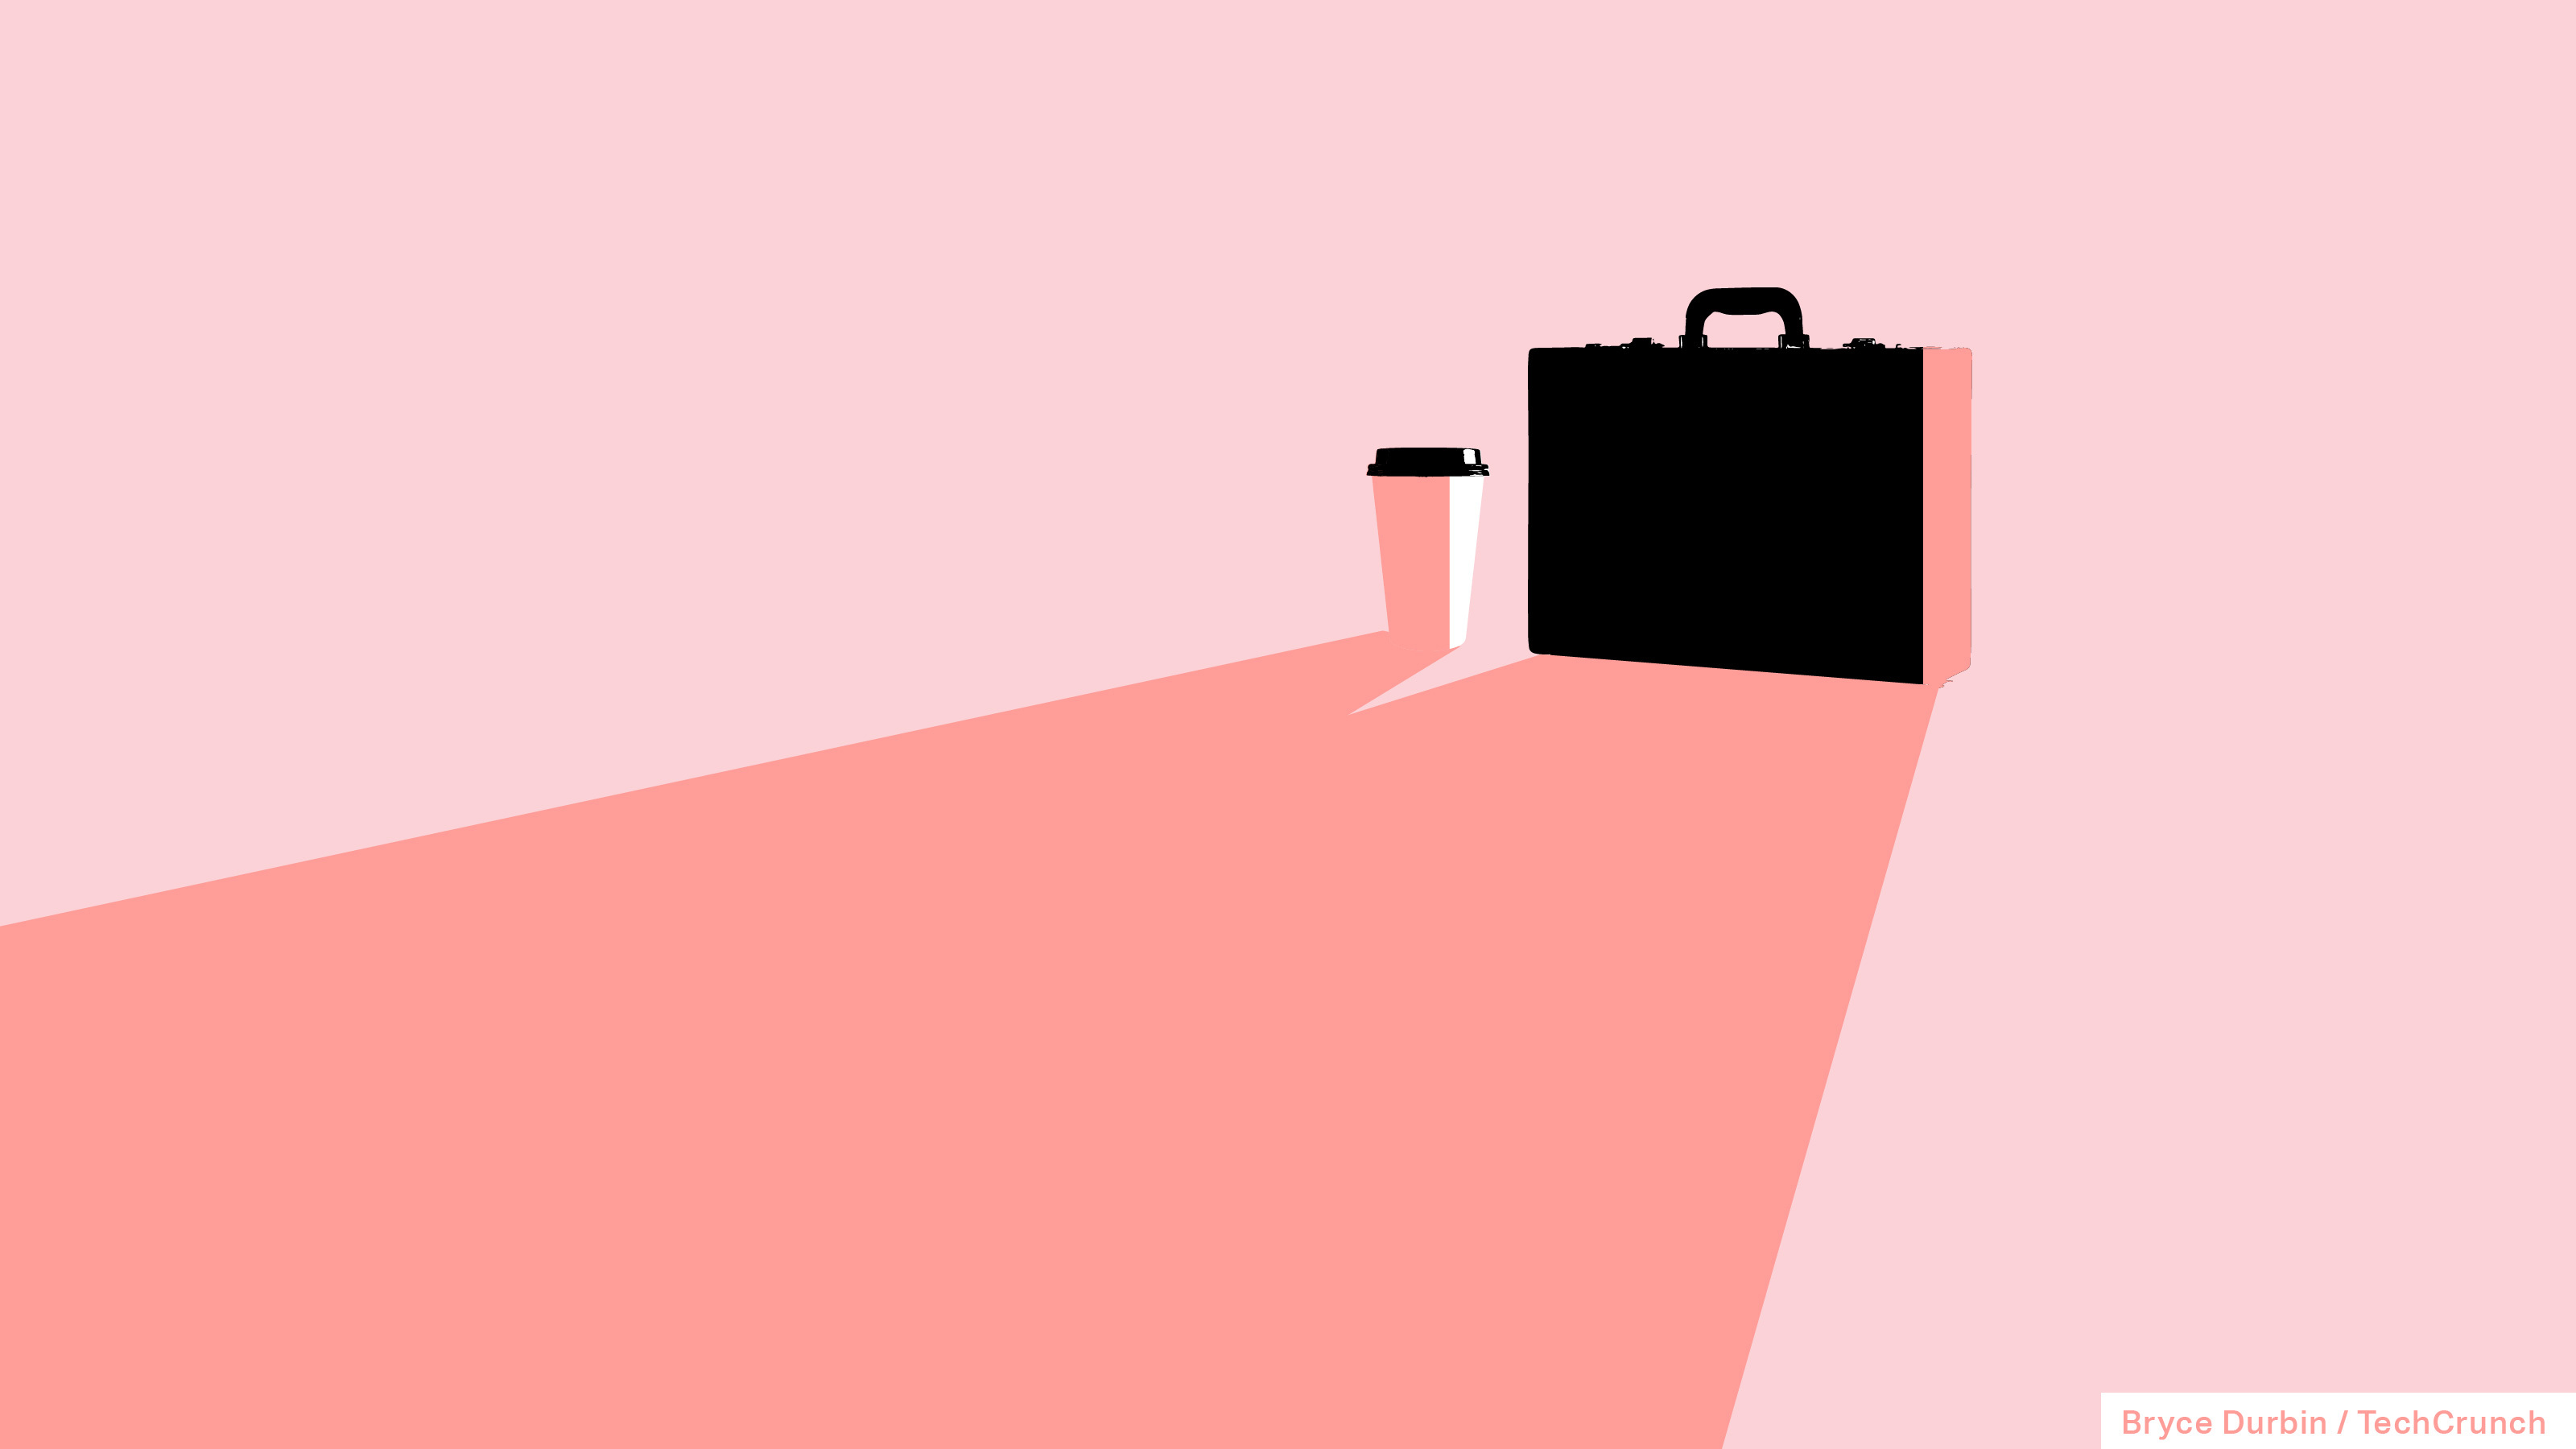 A cup of coffee and a briefcase in millennial pink to depict the rise of the "girlboss" term.